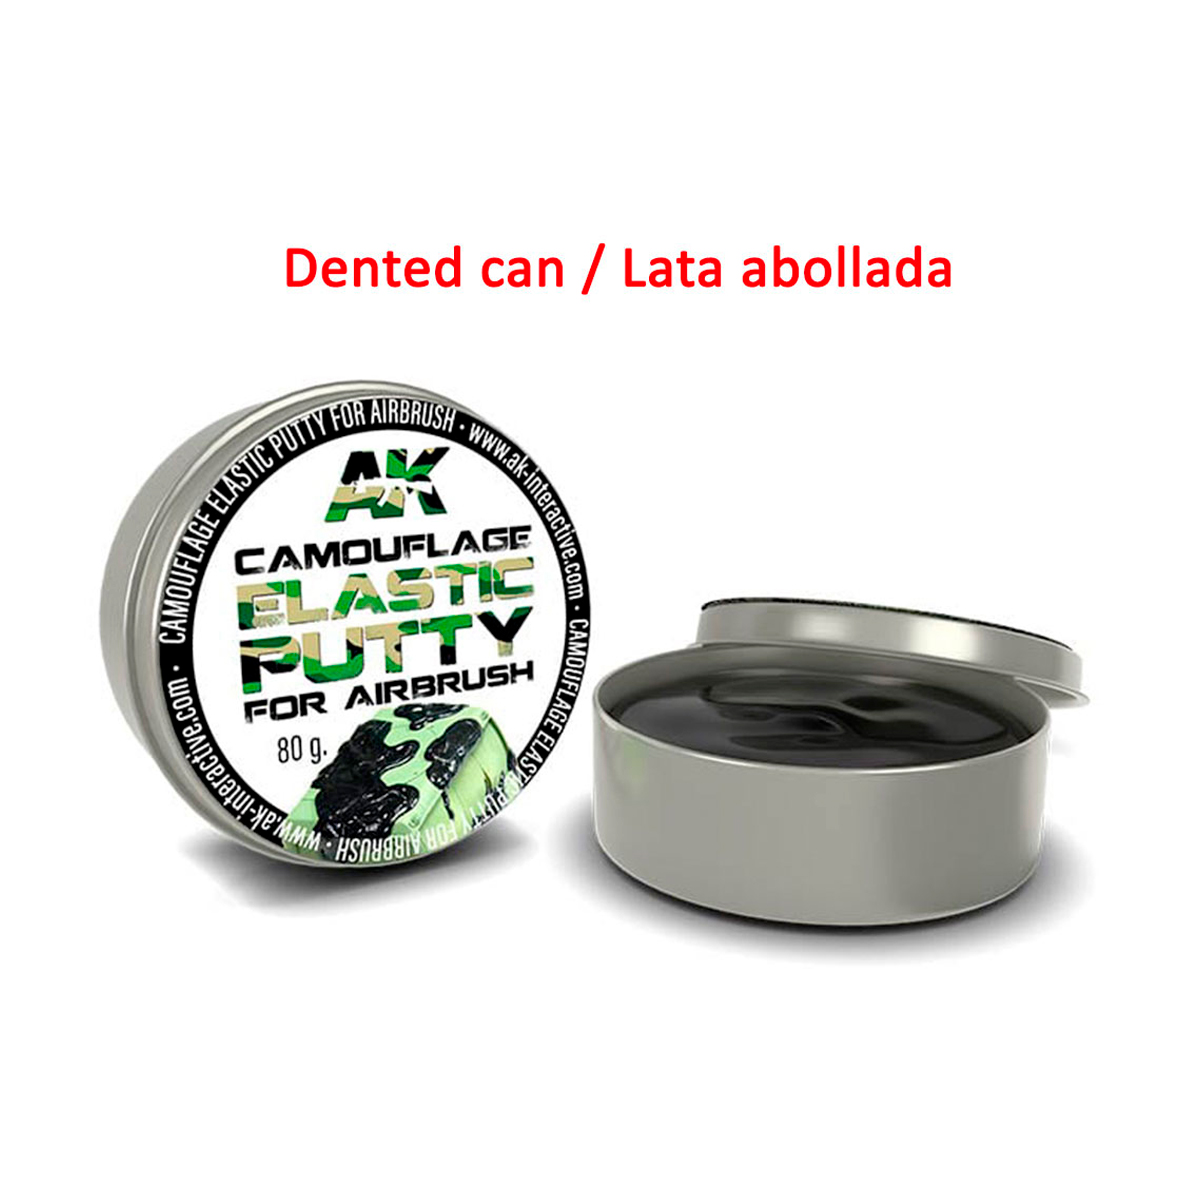 CAMOUFLAGE ELASTIC PUTTY (Dented can / Lata abollada)